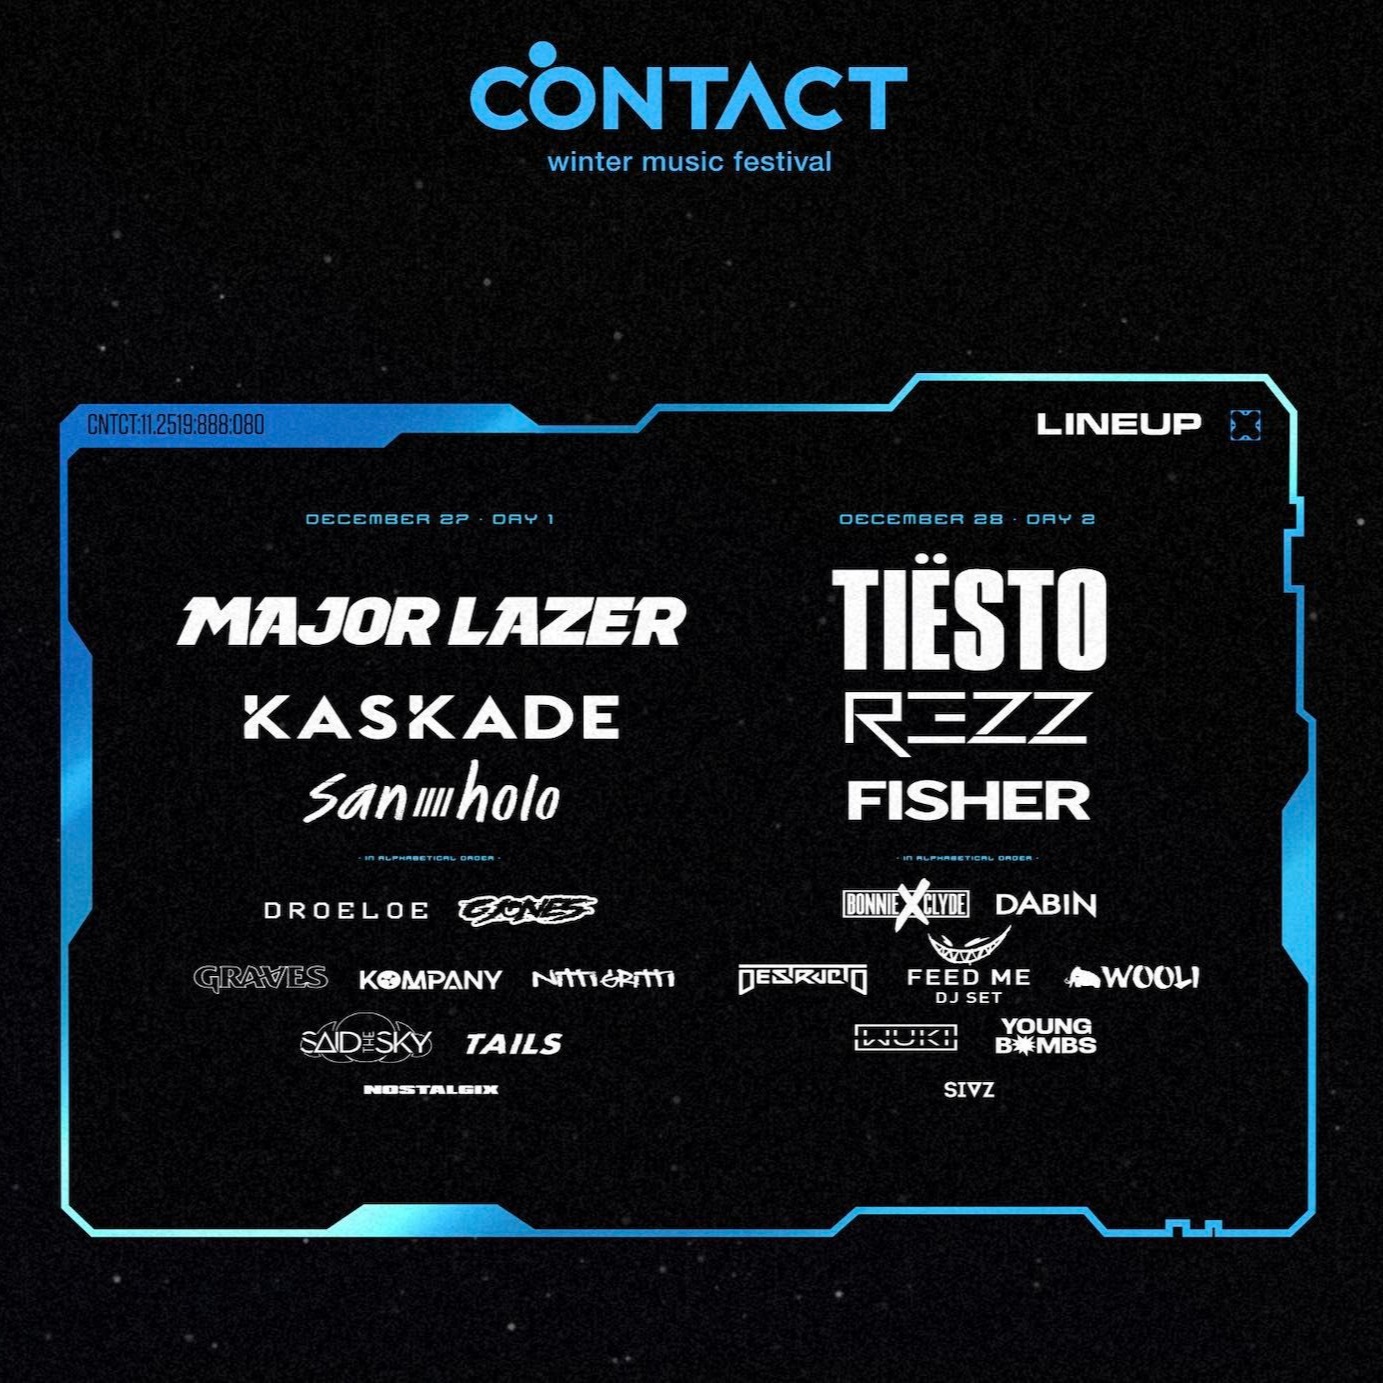 CONTACT WINTER MUSIC FESTIVAL 2019 | Vancouver